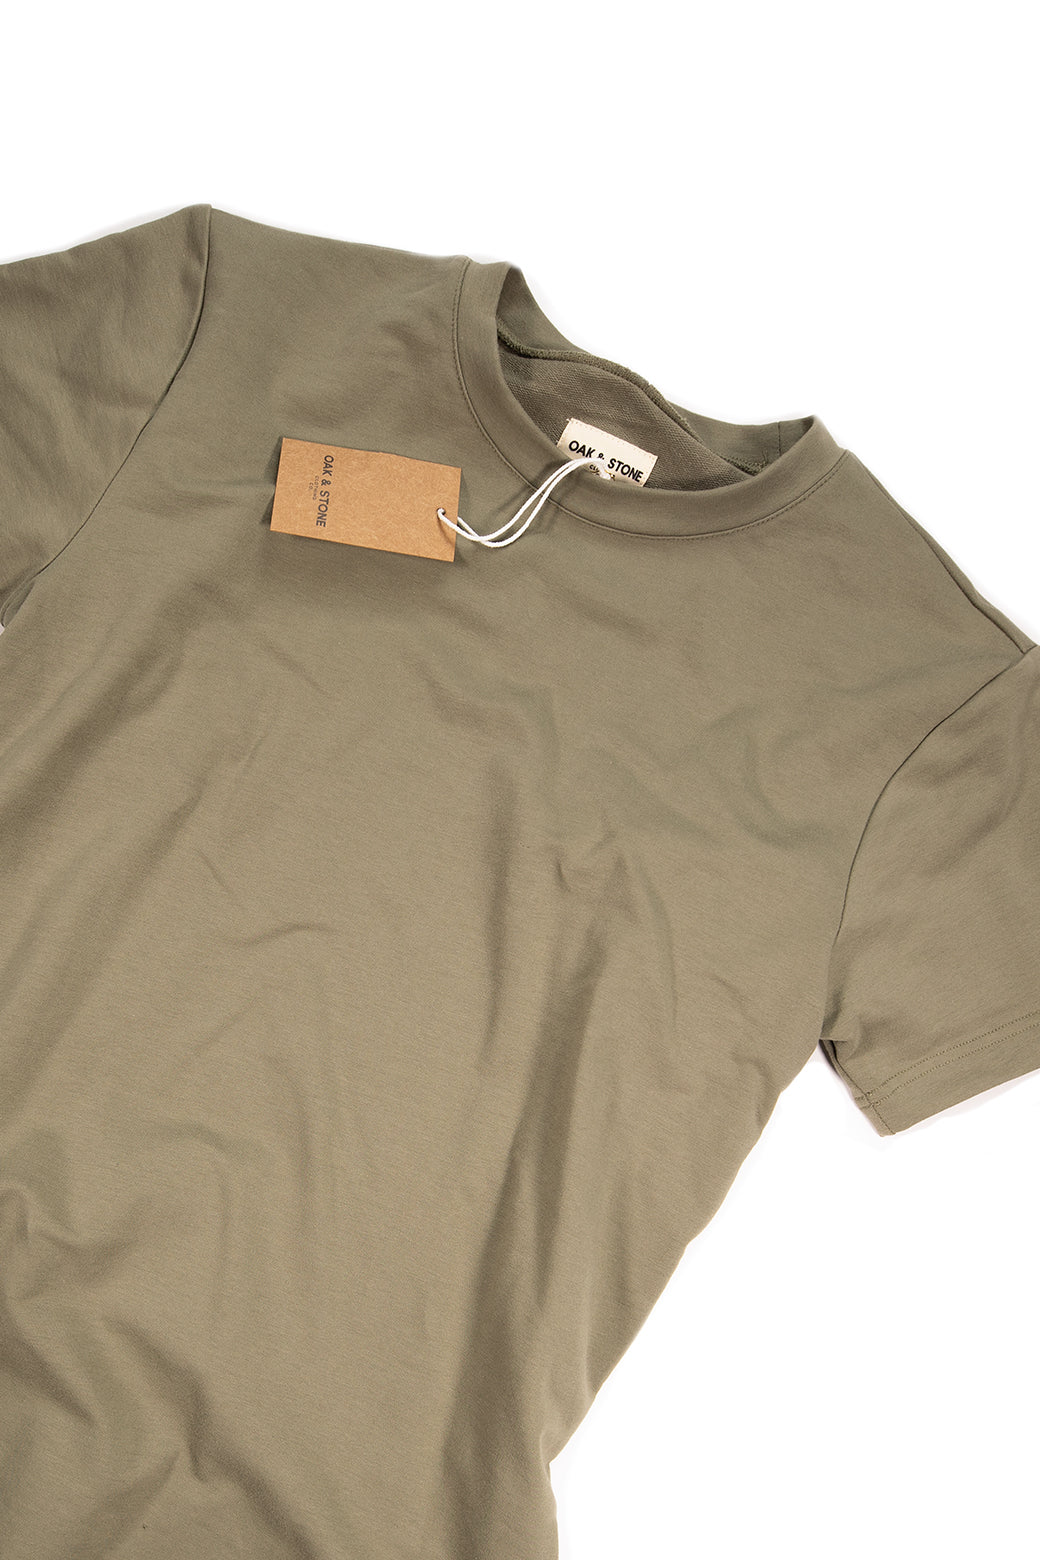 The Classic S/S Tee - Olive - Oak & Stone Clothing Co.